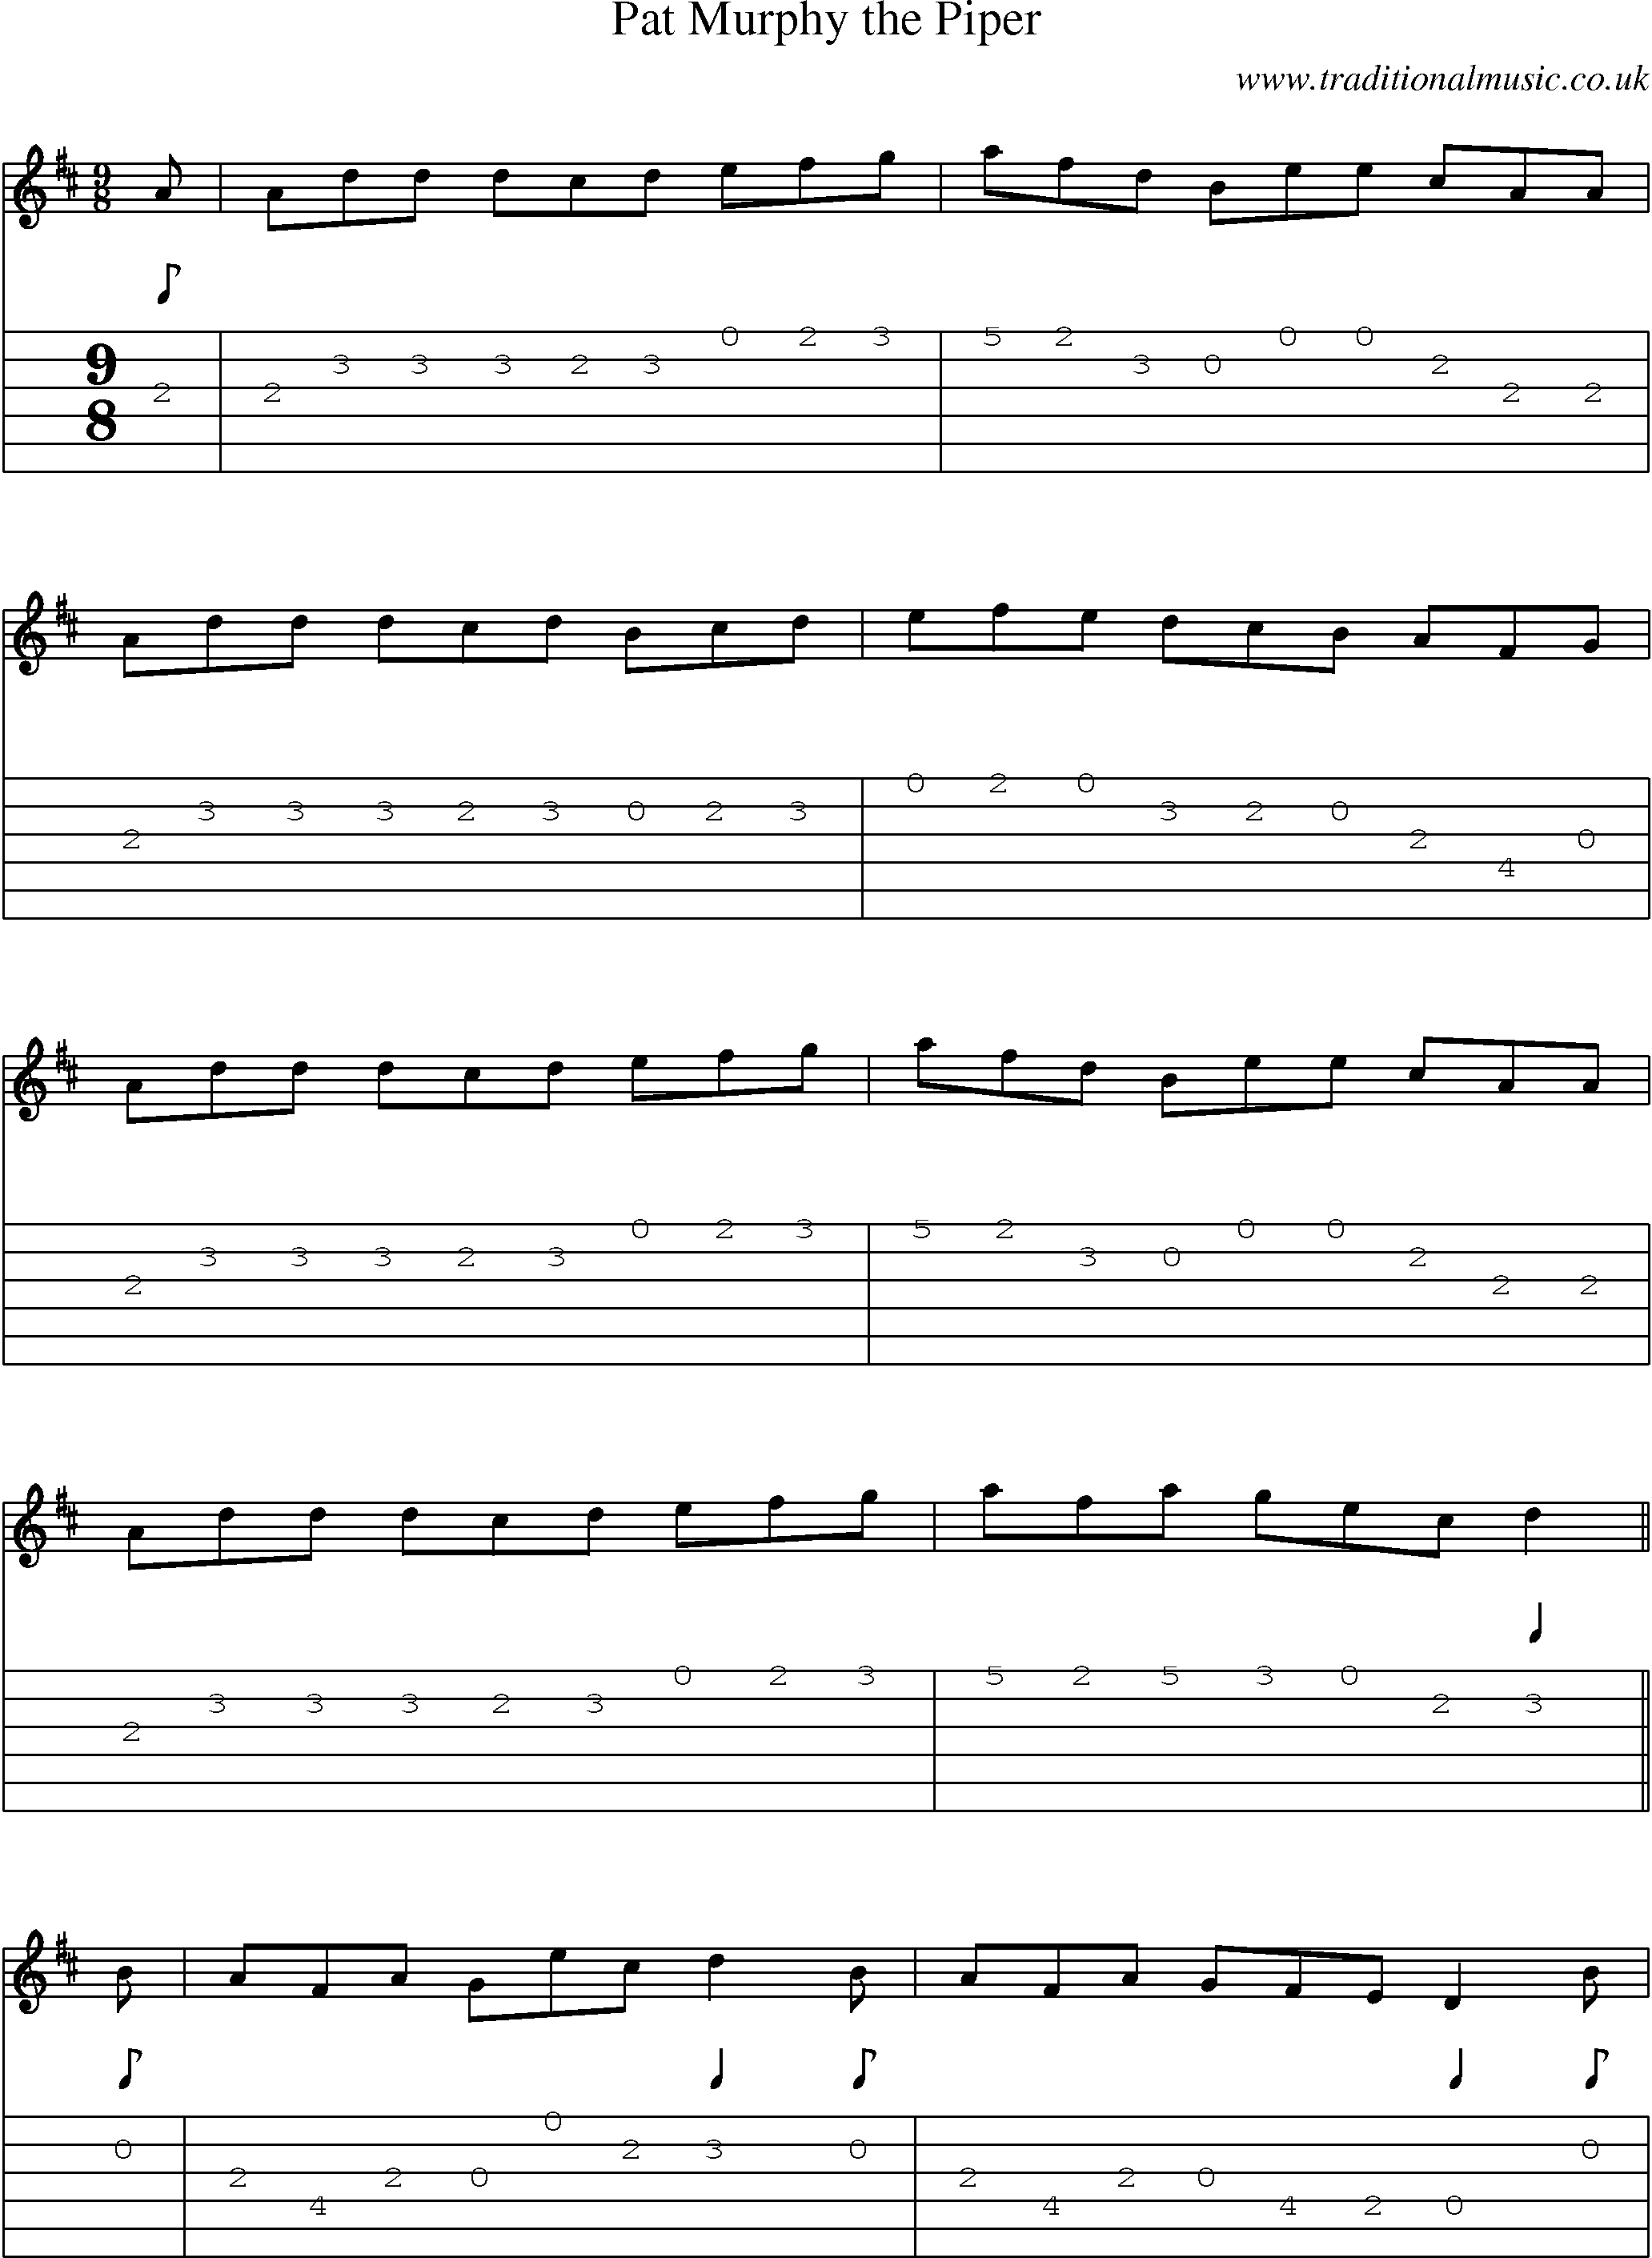 Music Score and Guitar Tabs for Pat Murphy Piper